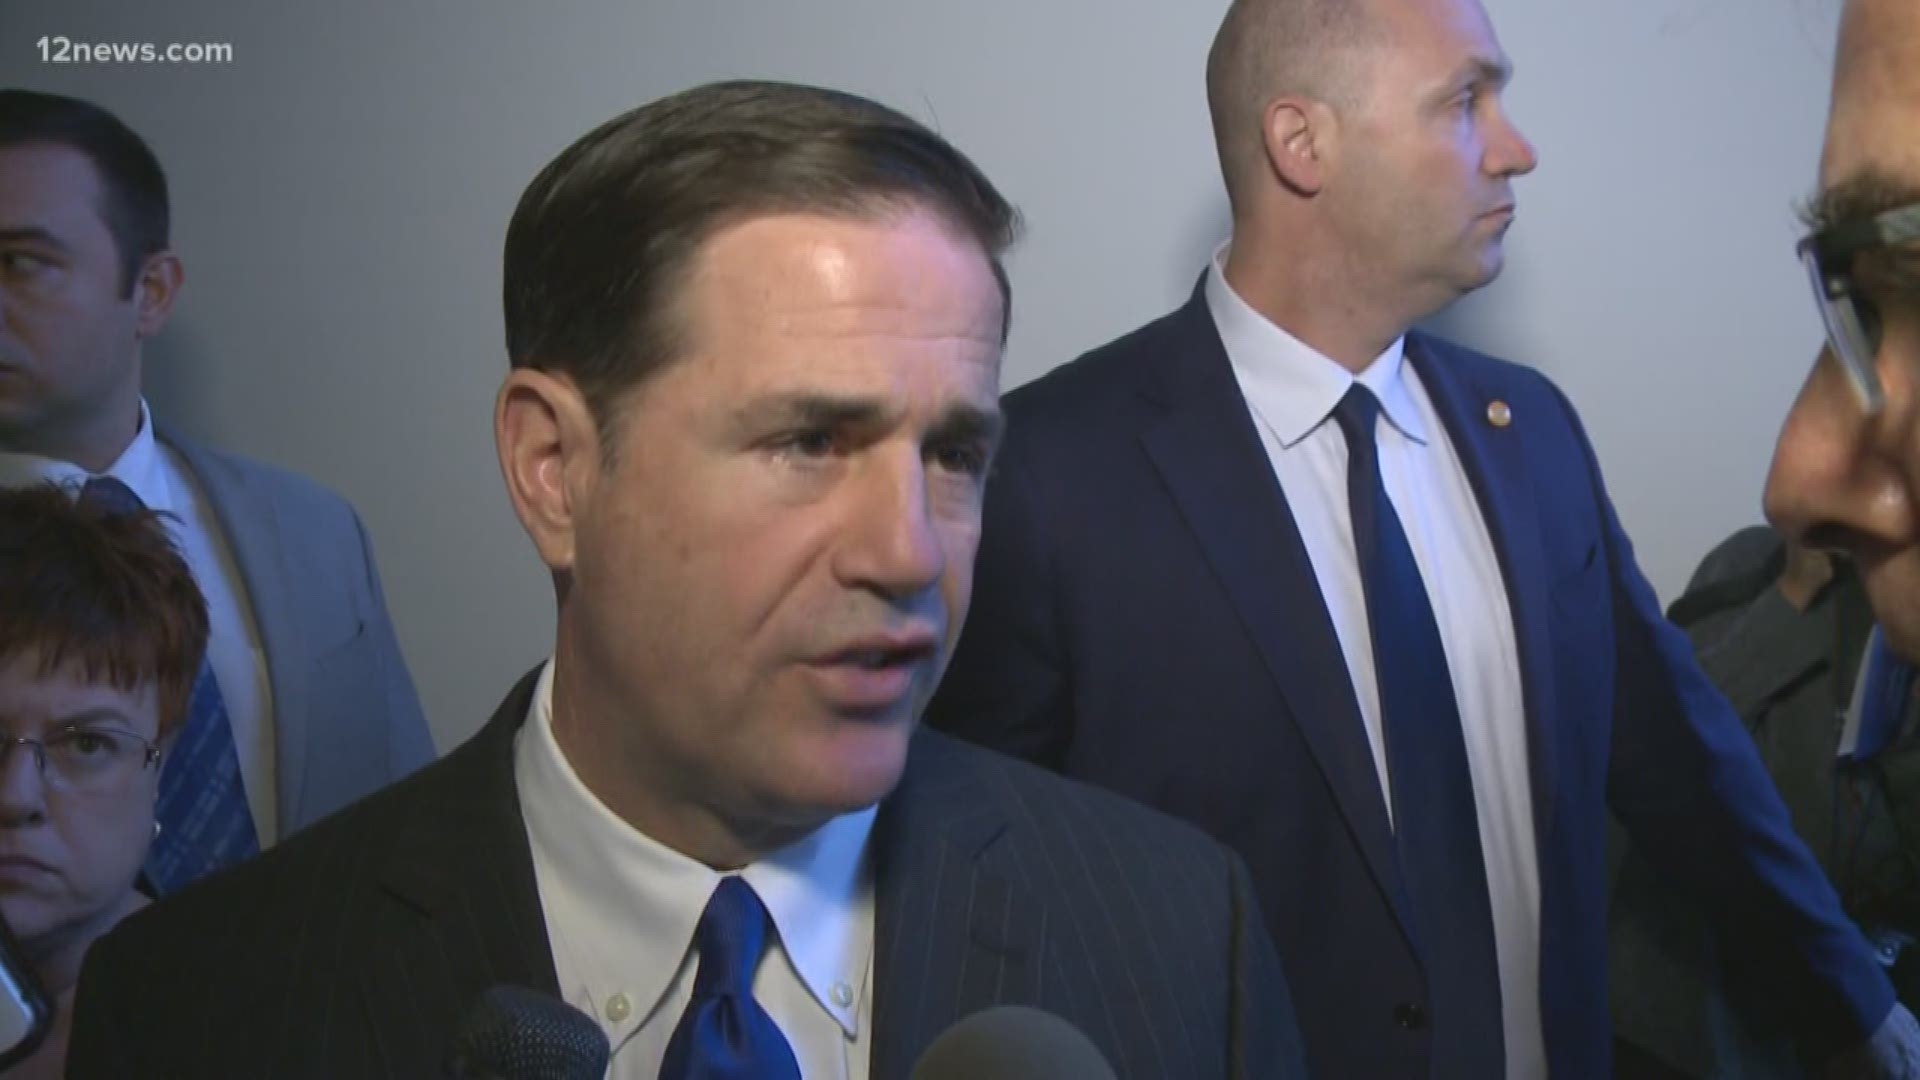 Governor Ducey signed a letter a few months back supporting Judge Kavanaugh for the Supreme Court seat. Now he and Martha McSally say both sides need to be heard before a decision is made.